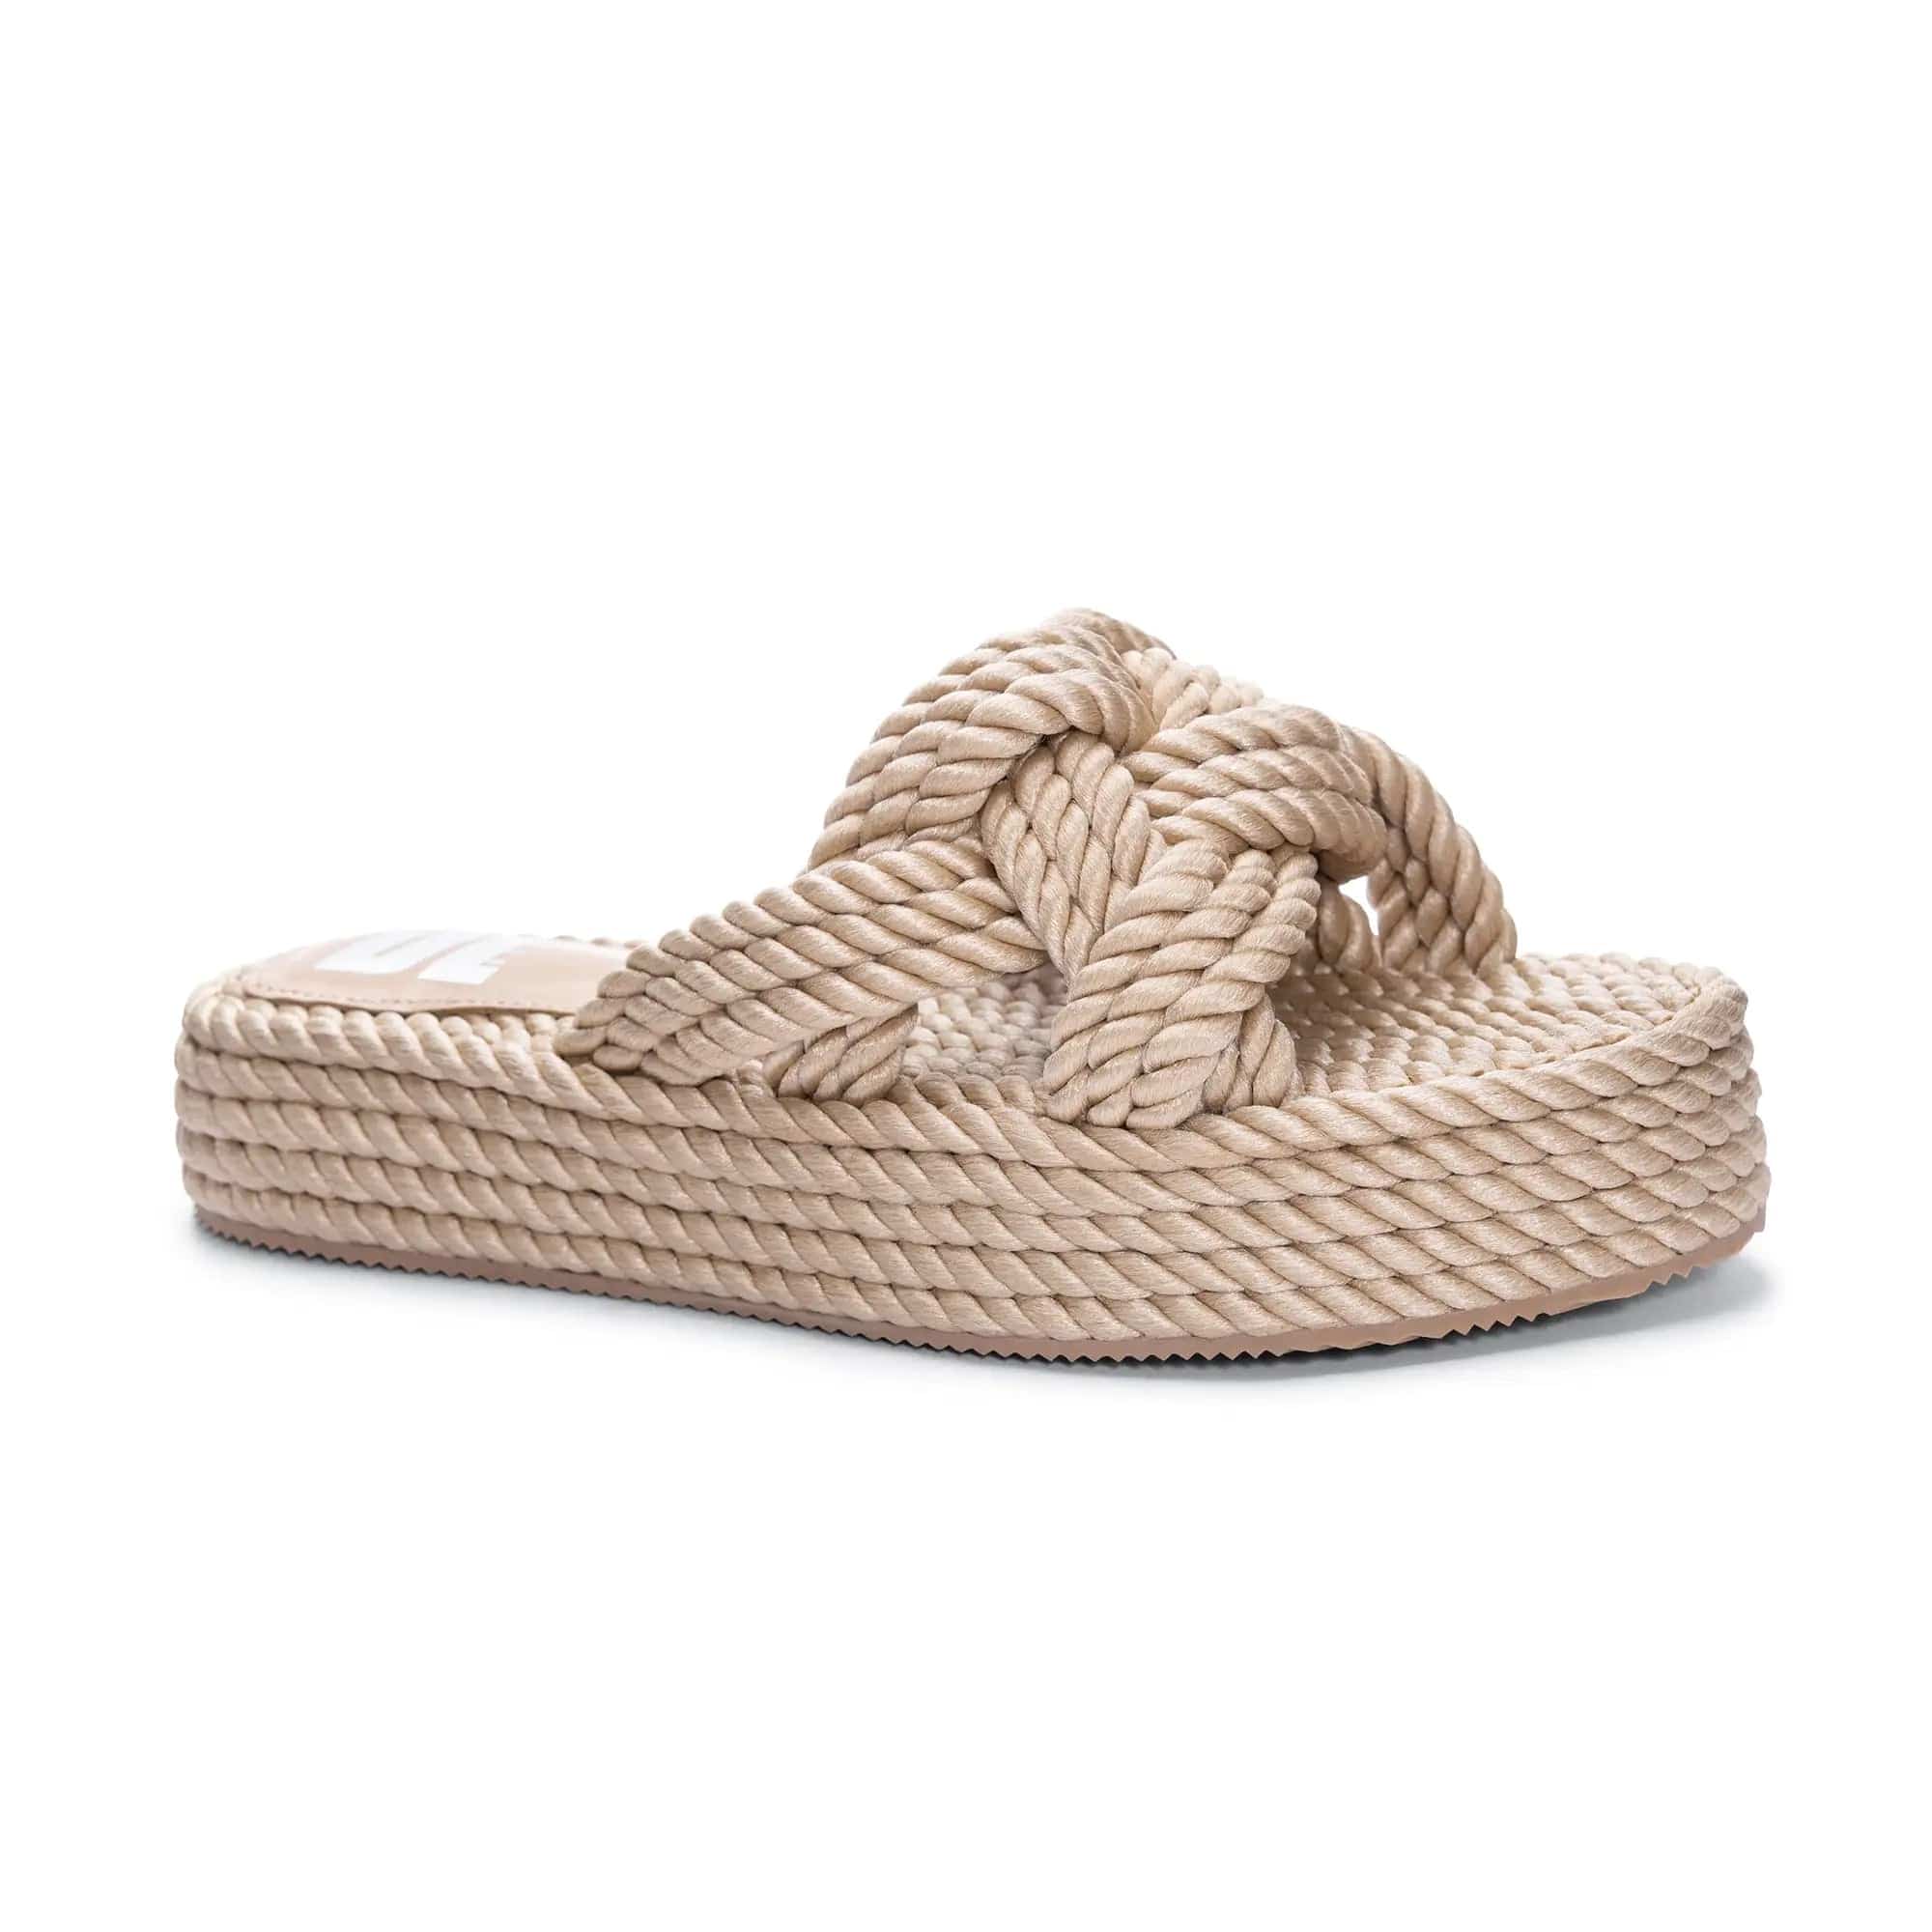 Dirty Laundry Knotty Casual Sandal In Natural - Infinity Raine